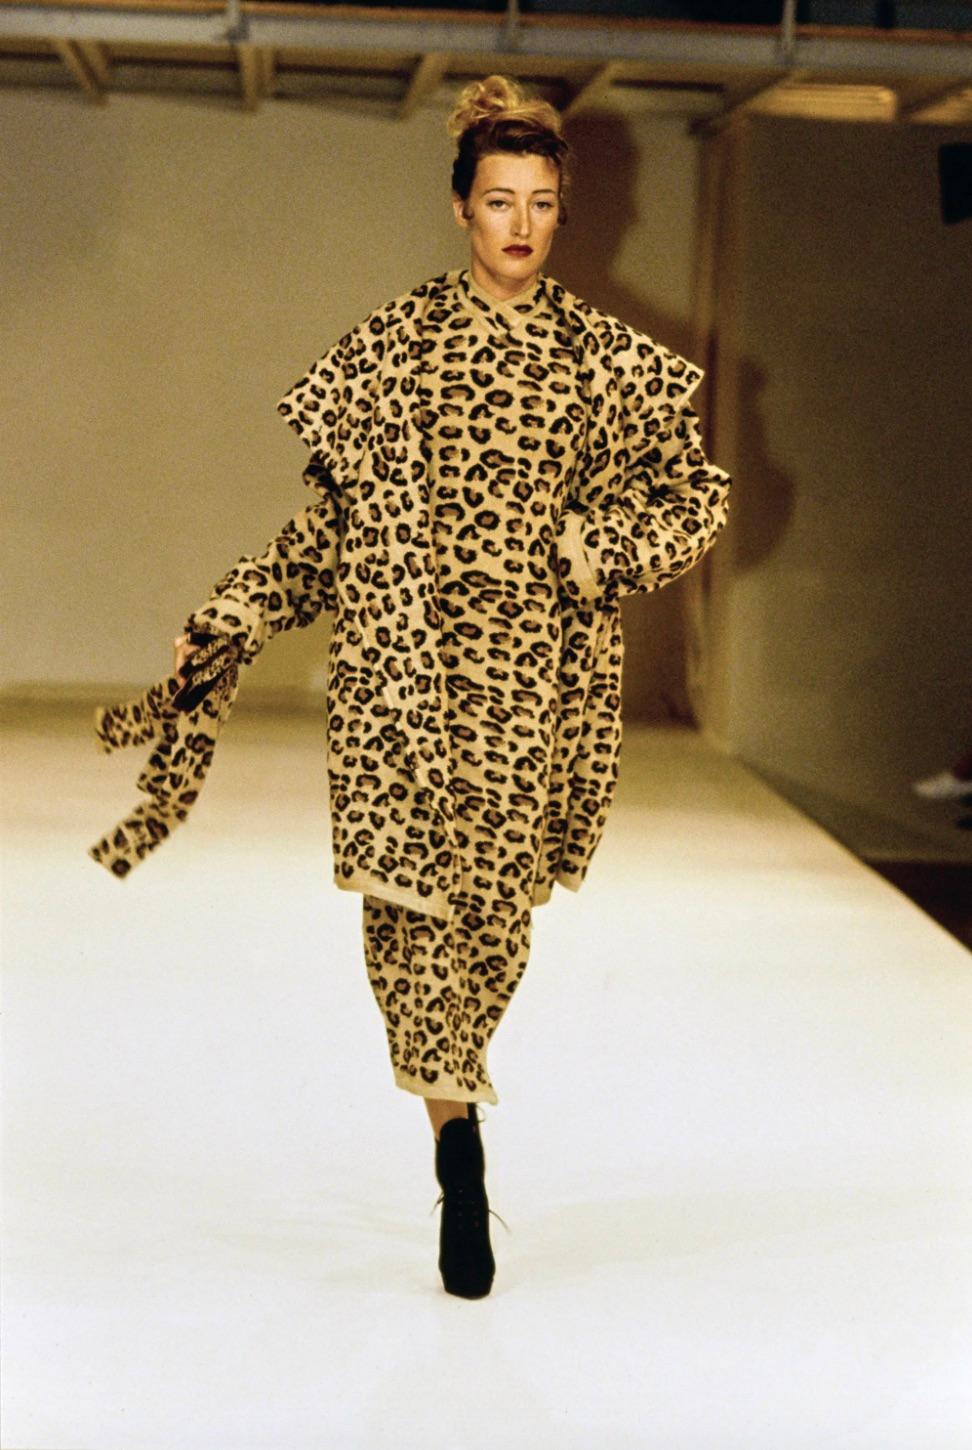 Meet the ultimate collector's gem: Alaïa's leopard wool knit bodycon dress from the iconic F/W 1991 collection. The leopard print from Alaïa's fall 1991 collection is undeniably one of his most iconic designs, instantly recognizable. It had a